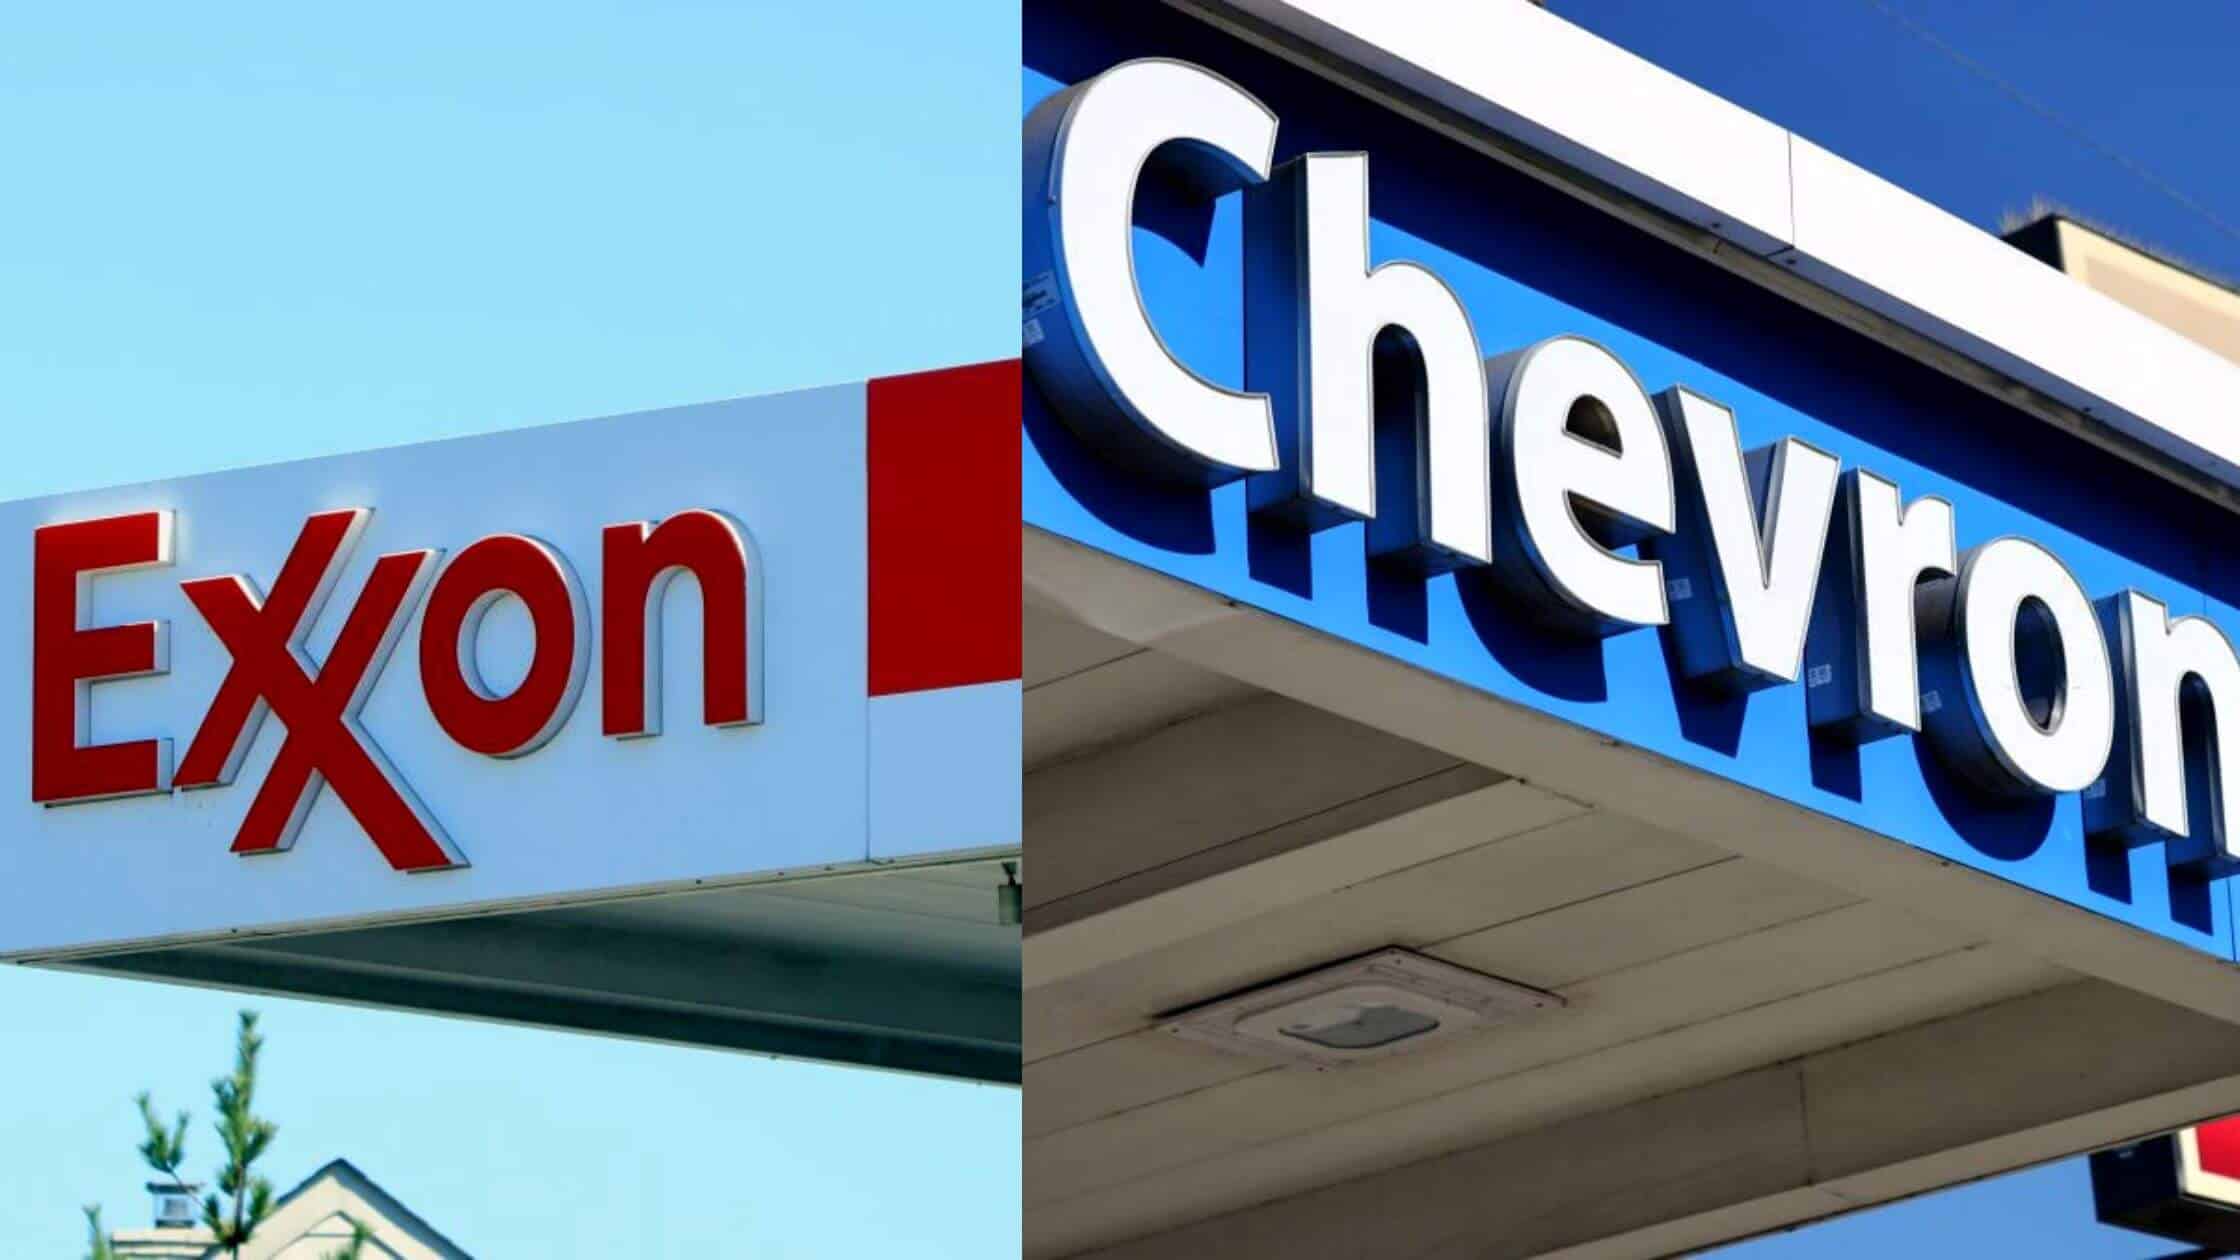 Exxon And Chevron Share $100 Billion Profit As A Result Of Soaring Oil Prices